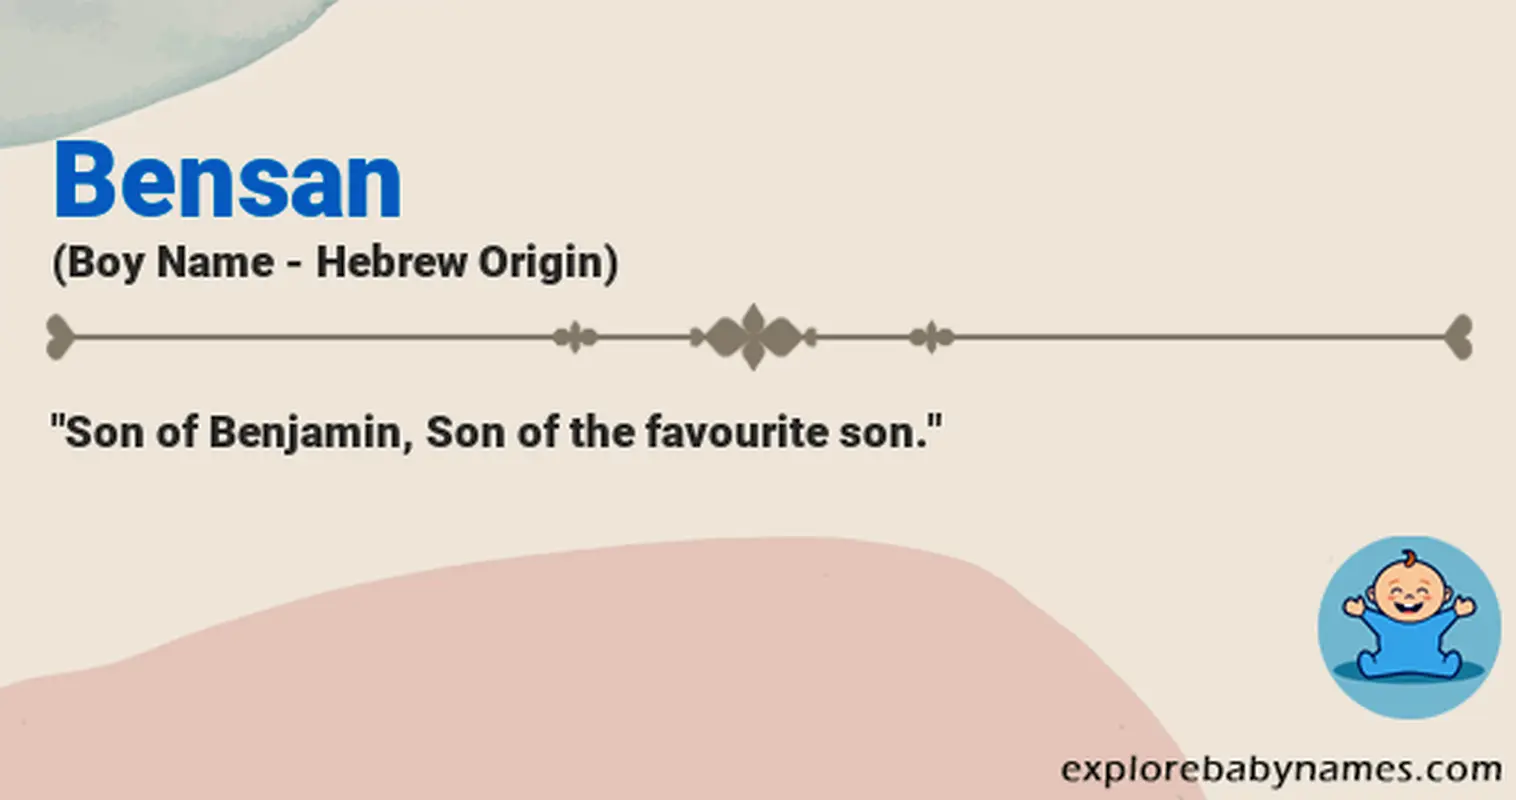 Meaning of Bensan